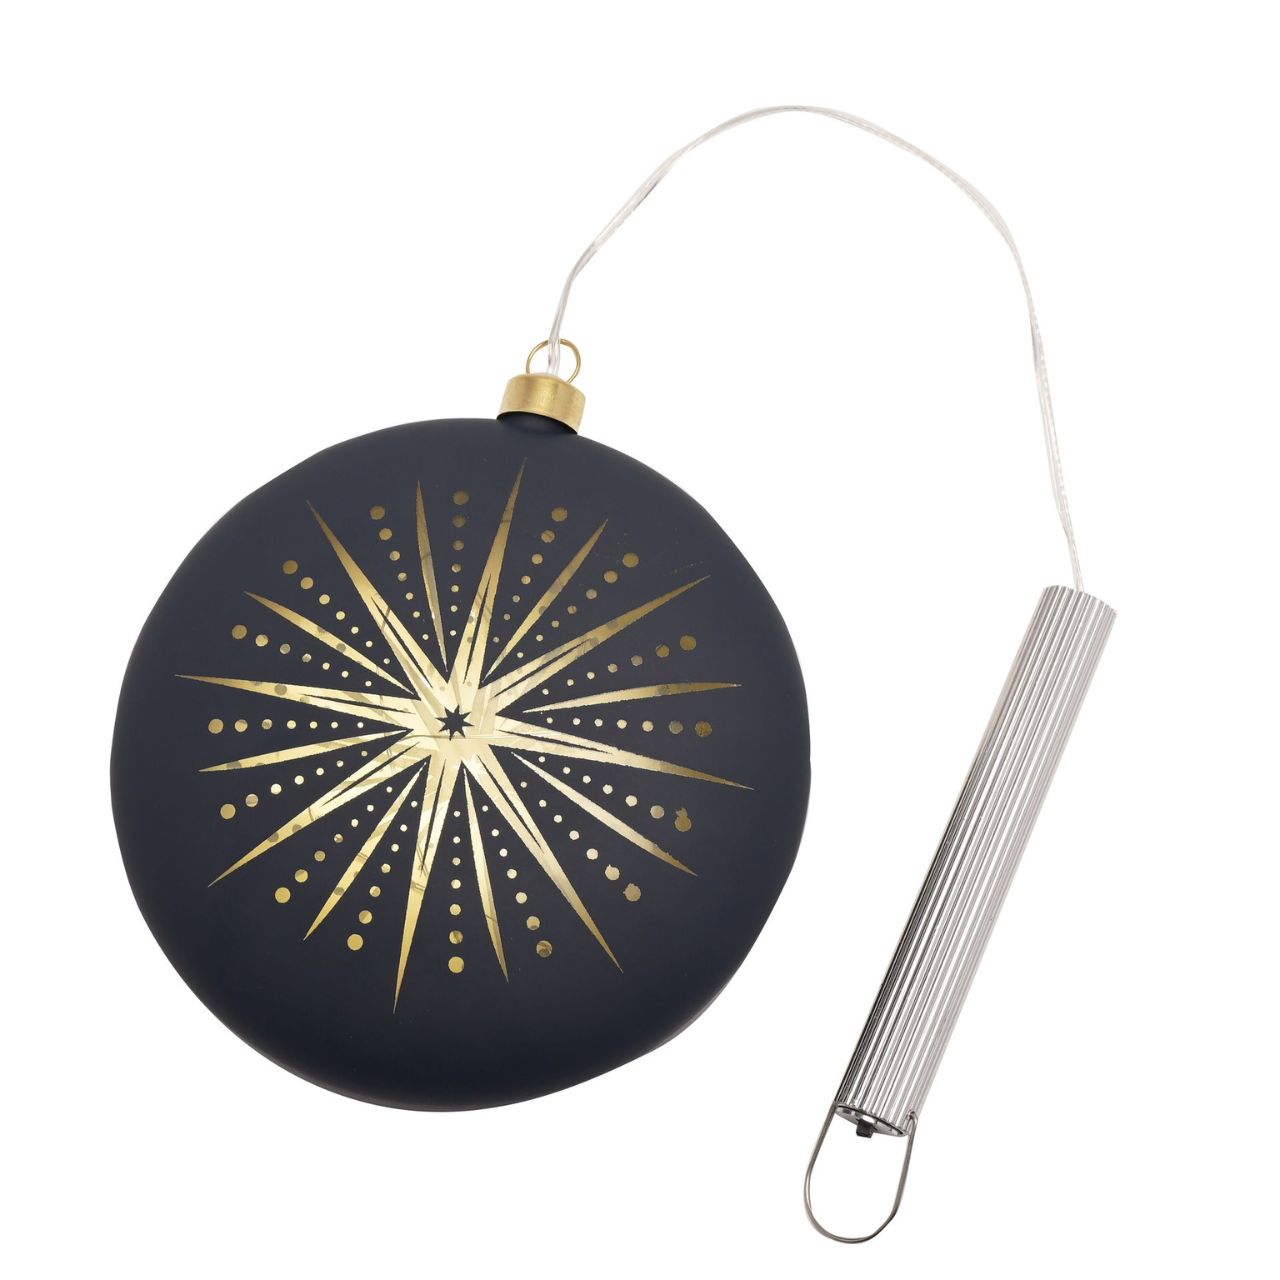 Celestial Blue Christmas  LED Hanging Light Decoration  A celestial blue LED round hanging light decoration by THE SEASONAL GIFT CO®.  This celestial decoration takes inspiration from the stars as it shines brightly for all to admire.